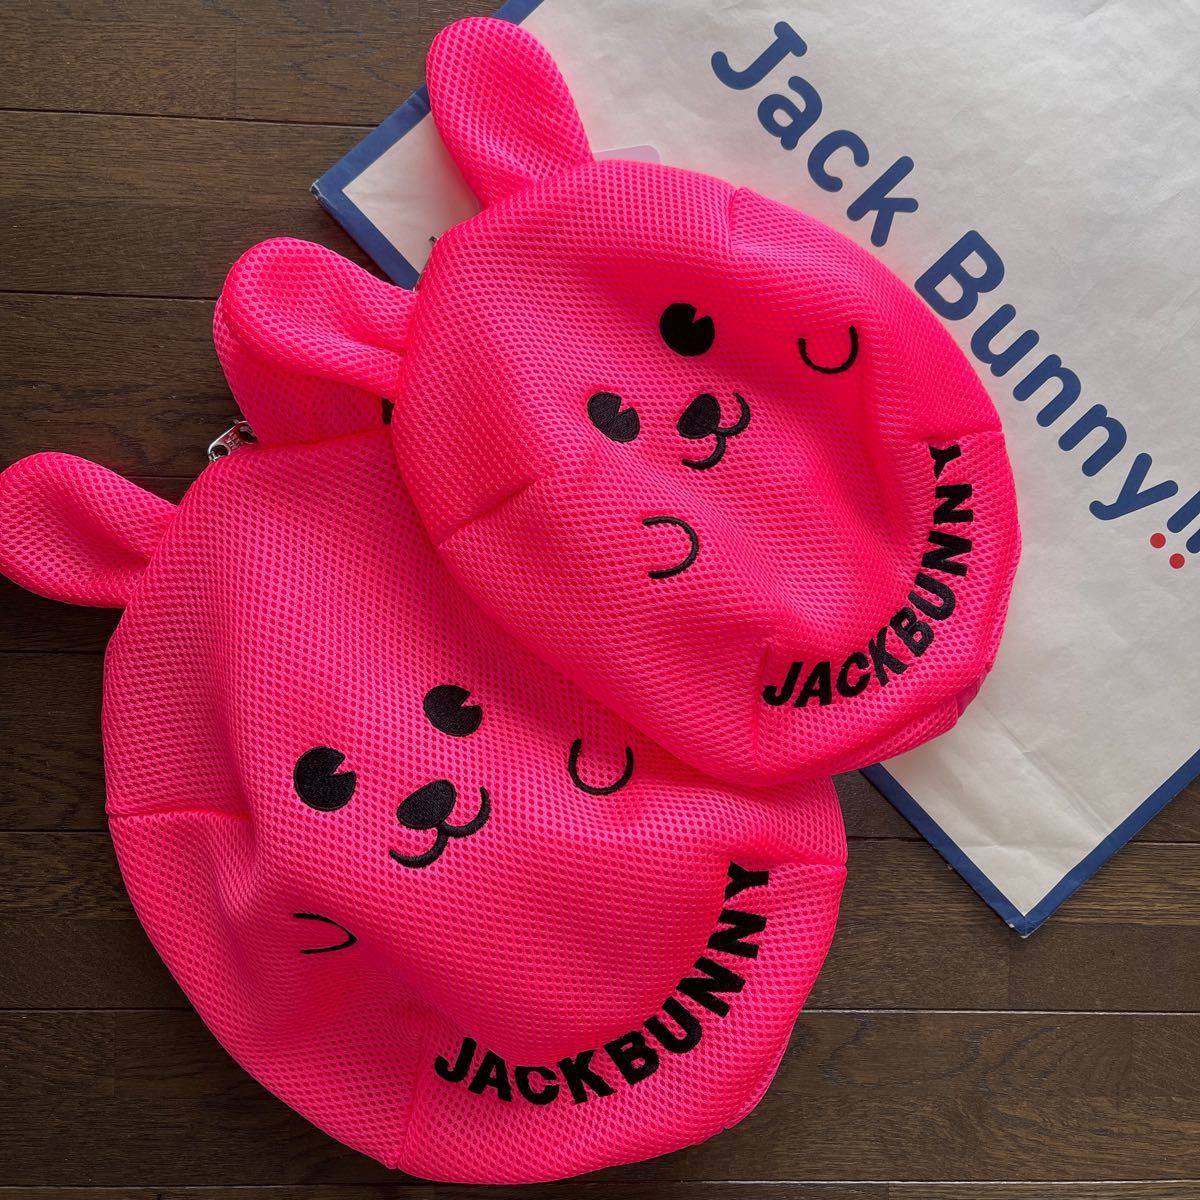  free shipping Jack ba knee by Pearly Gates JACK BUNNY... parent .MESH large small pouch (2 piece ) multi many sama . laundry travel ventilation Pink( bargain ) new goods 